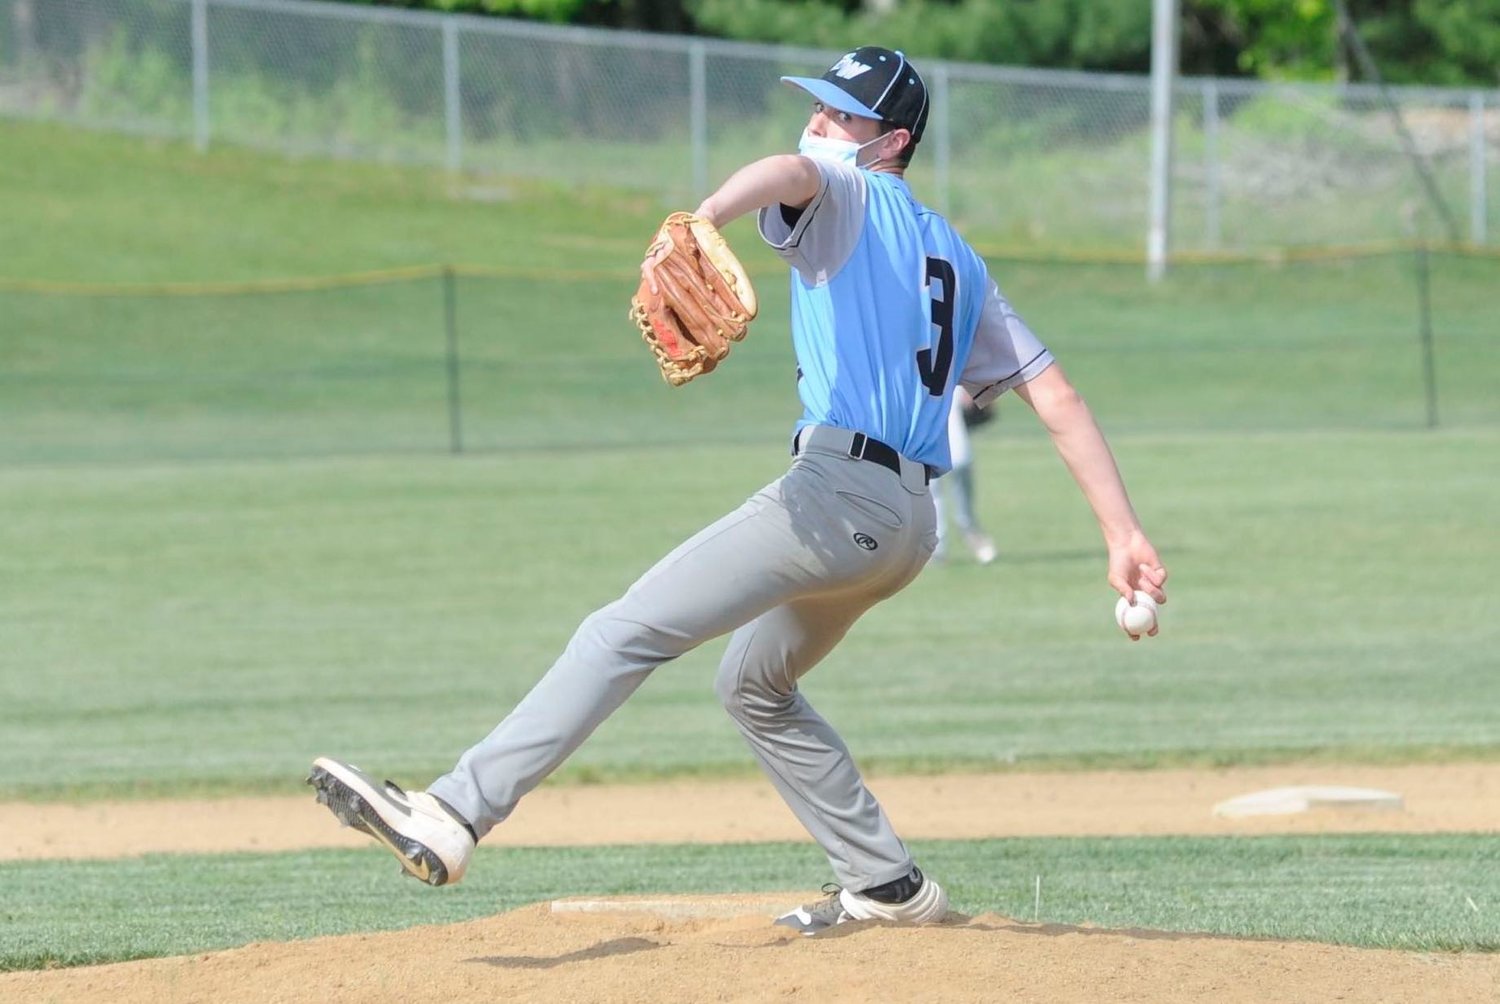 Daniel Hemmer was selected as the Bulldogs Co-Most Valuable Varsity Baseball Player for 2021. Hemmer also received the Baseball Coaches Award. When not hurling strikes, he played the game of hoops.